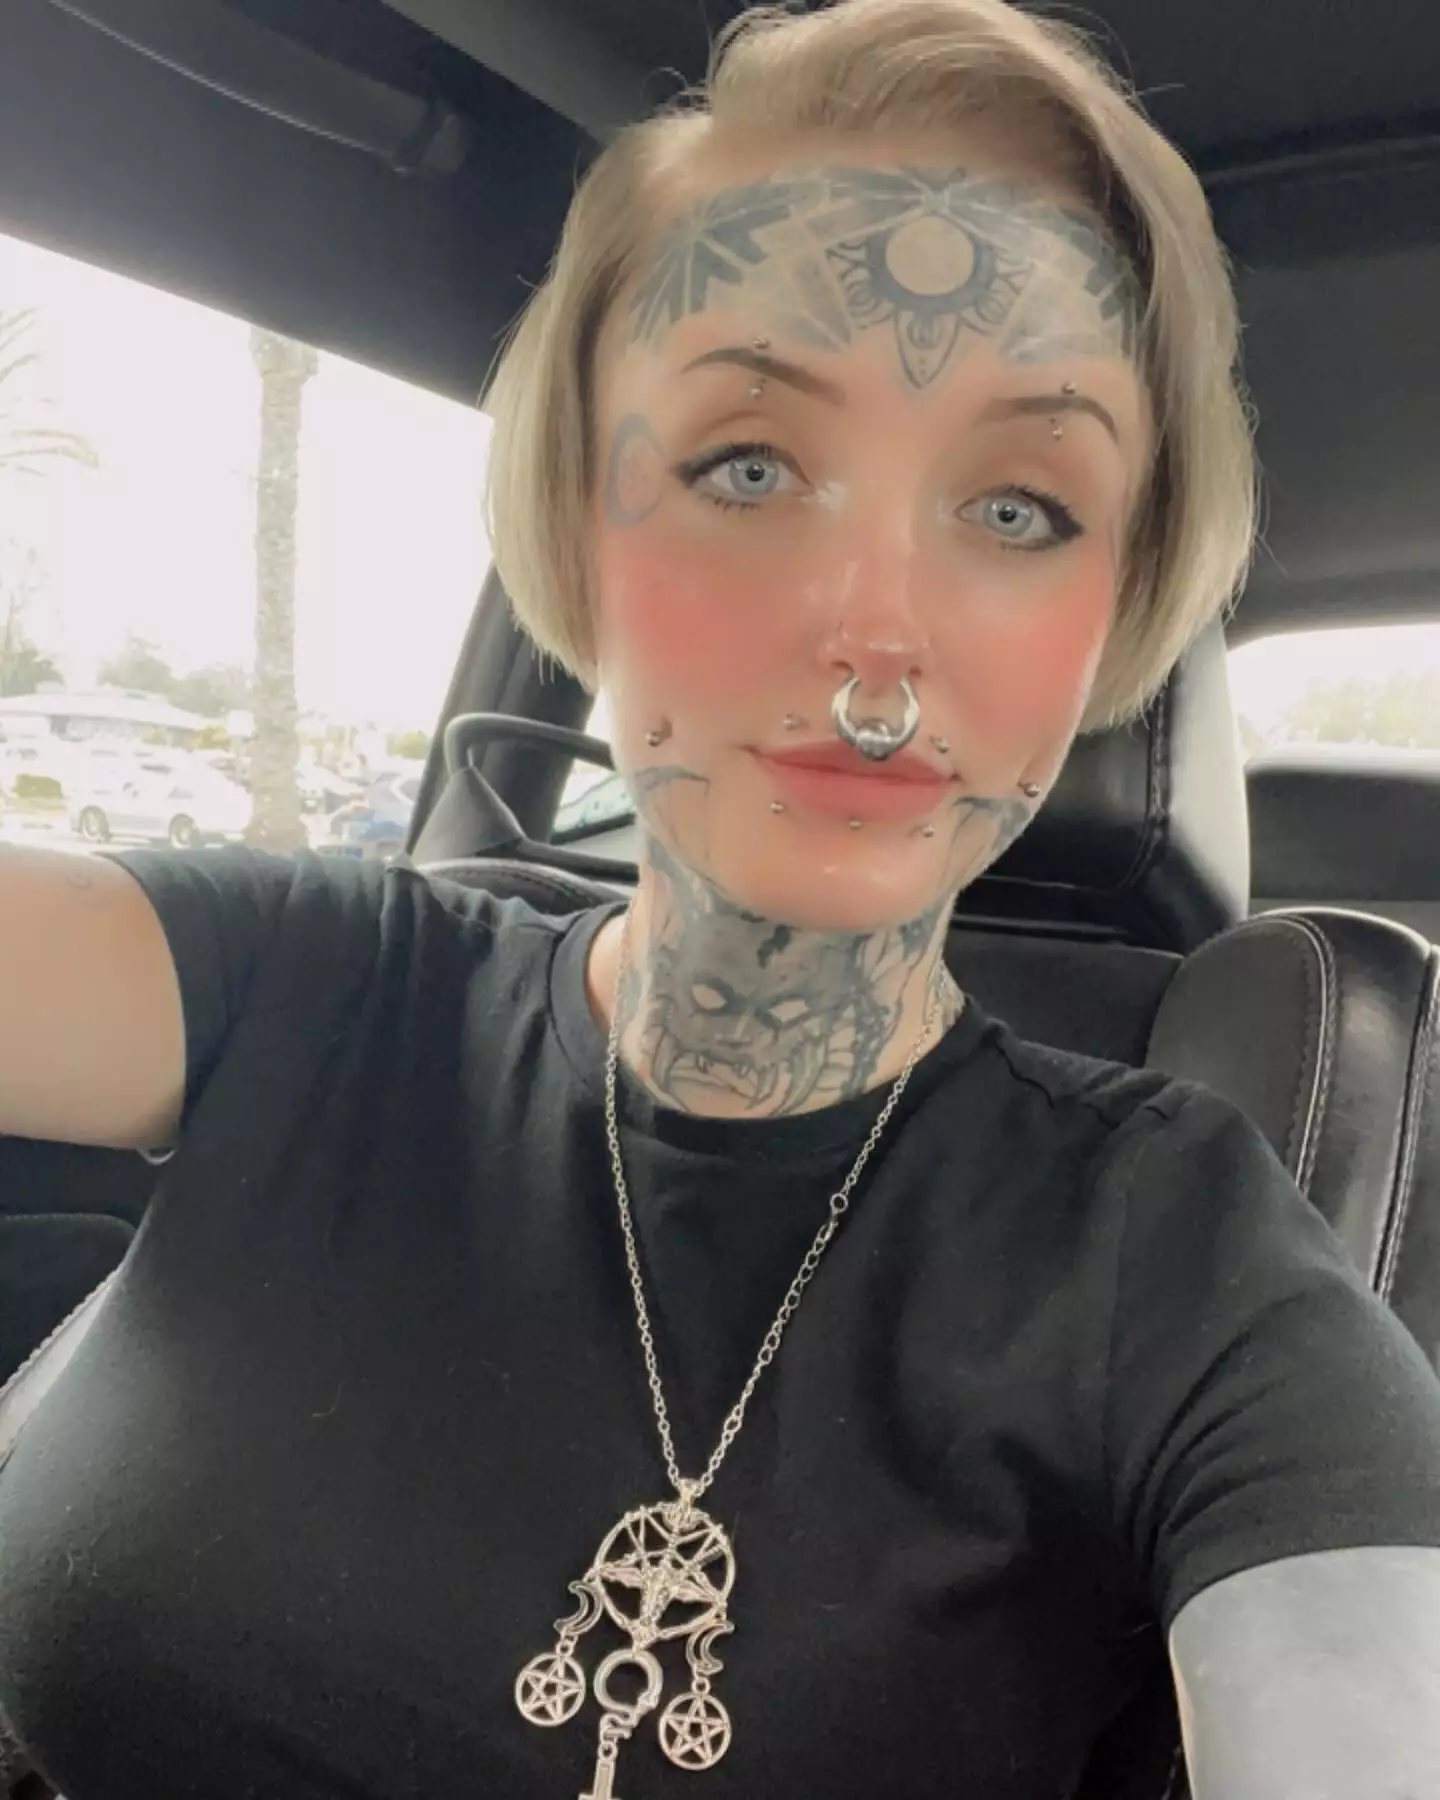 Ash O’Brien took to TikTok to share her reaction after being rejected from a job at TJ Maxx. (Instagram/@ashxobrien)